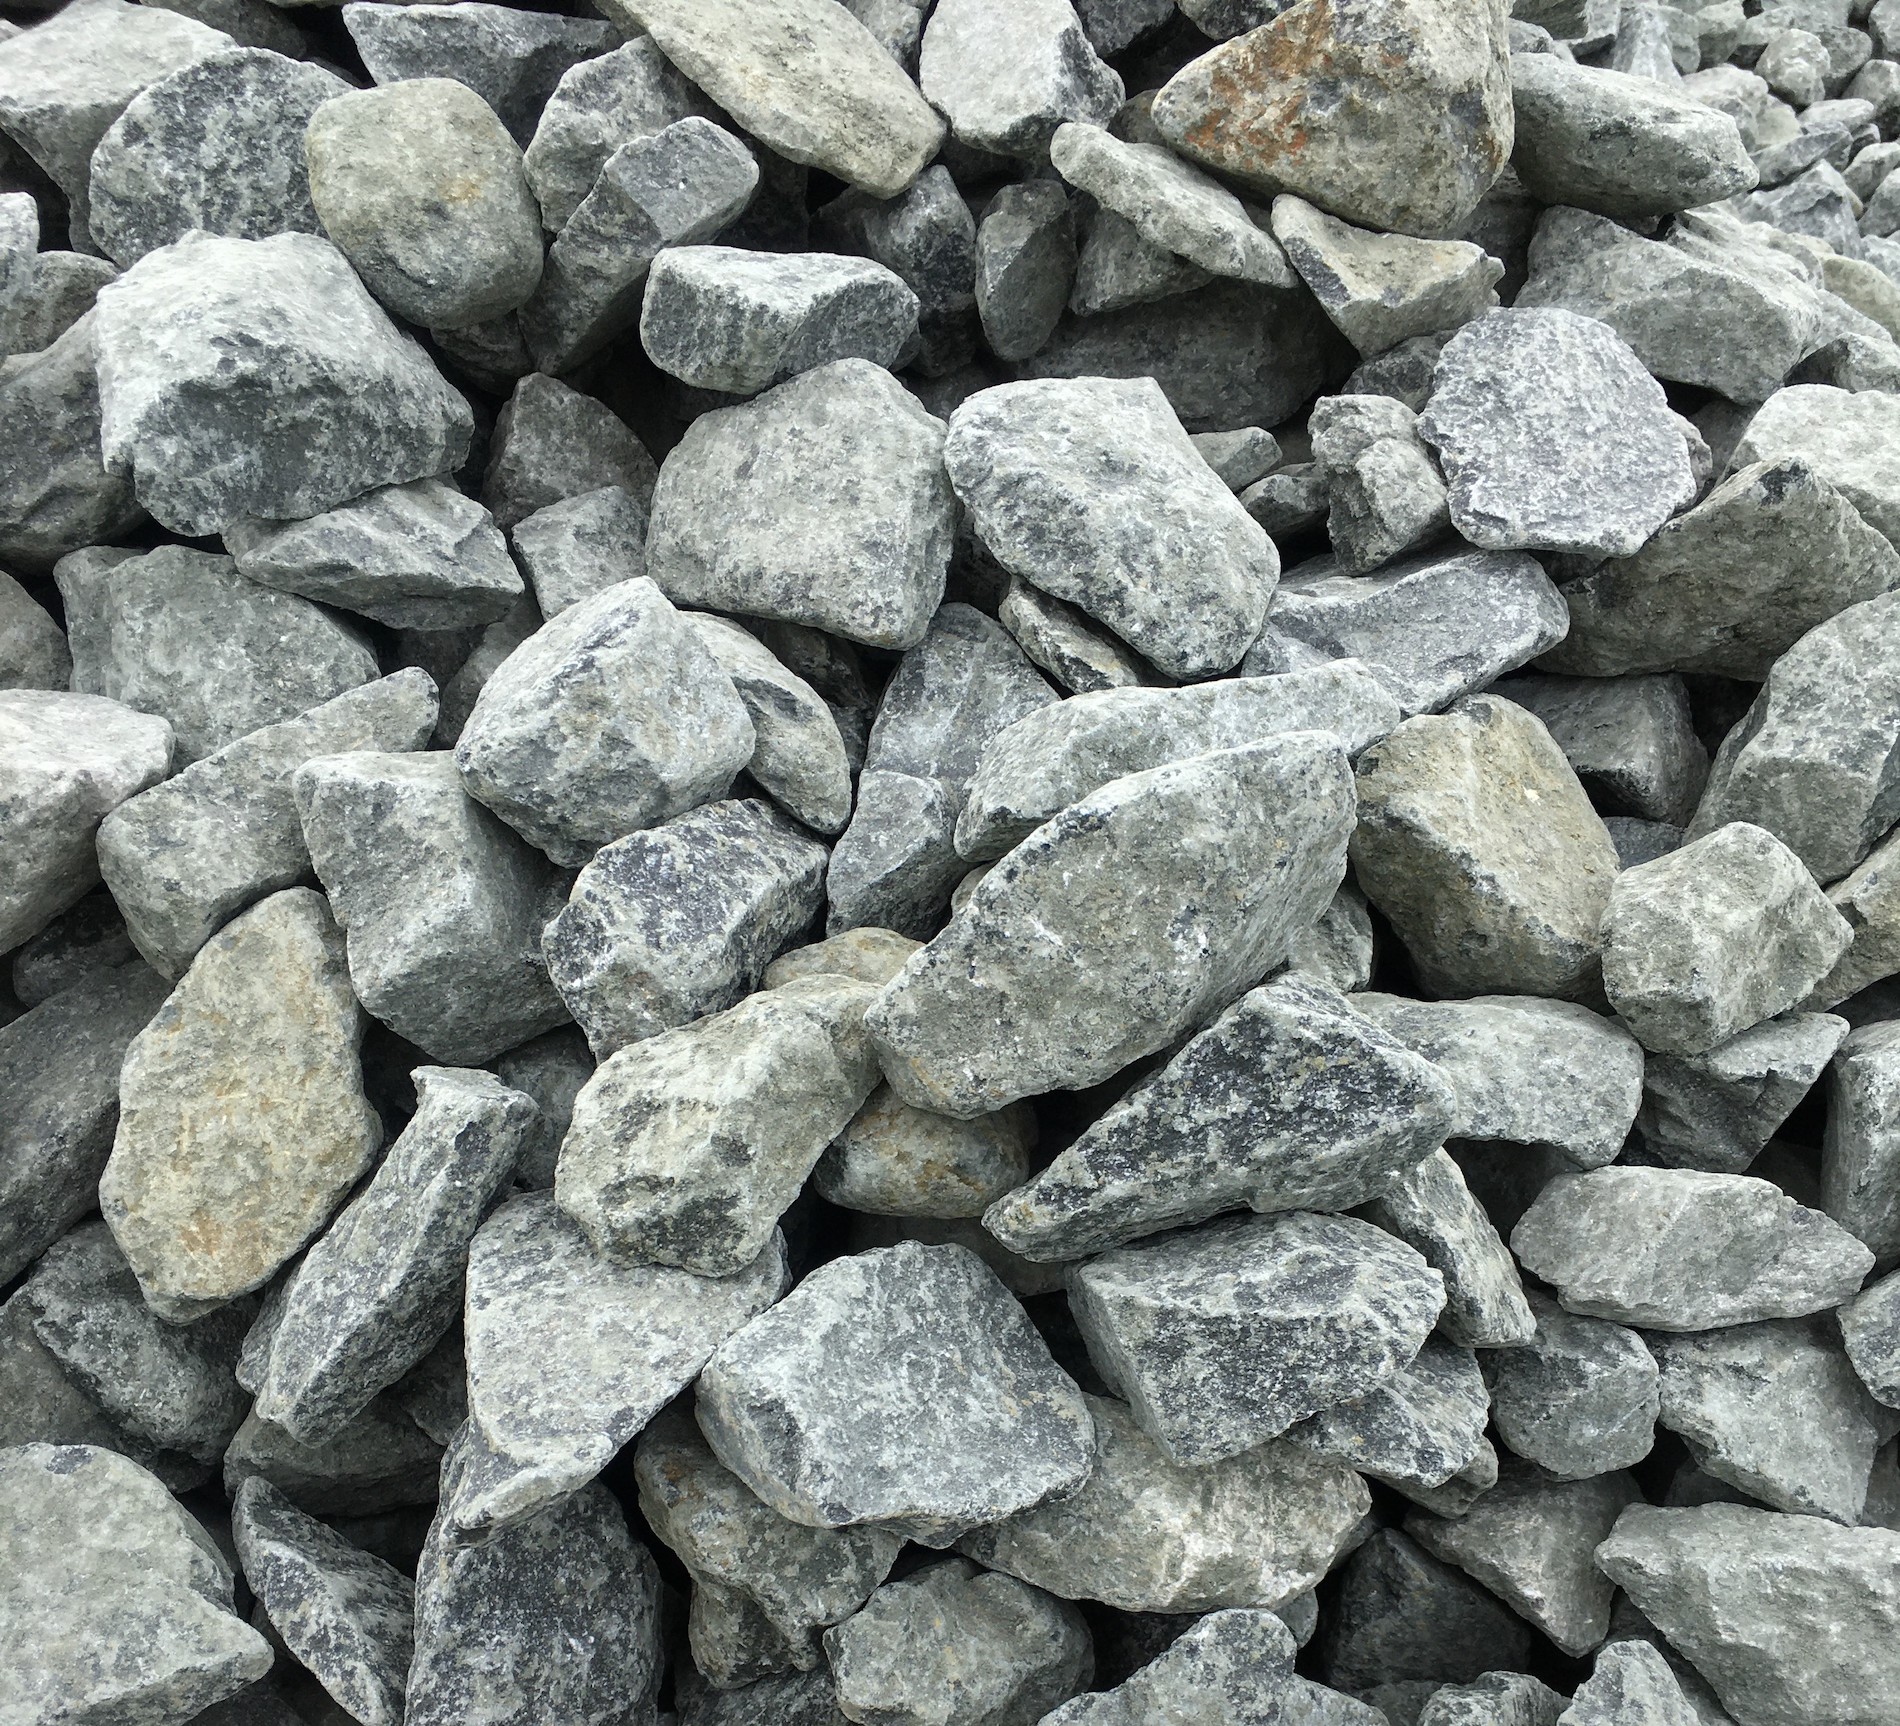 How to Dispose of Rocks and Gravel